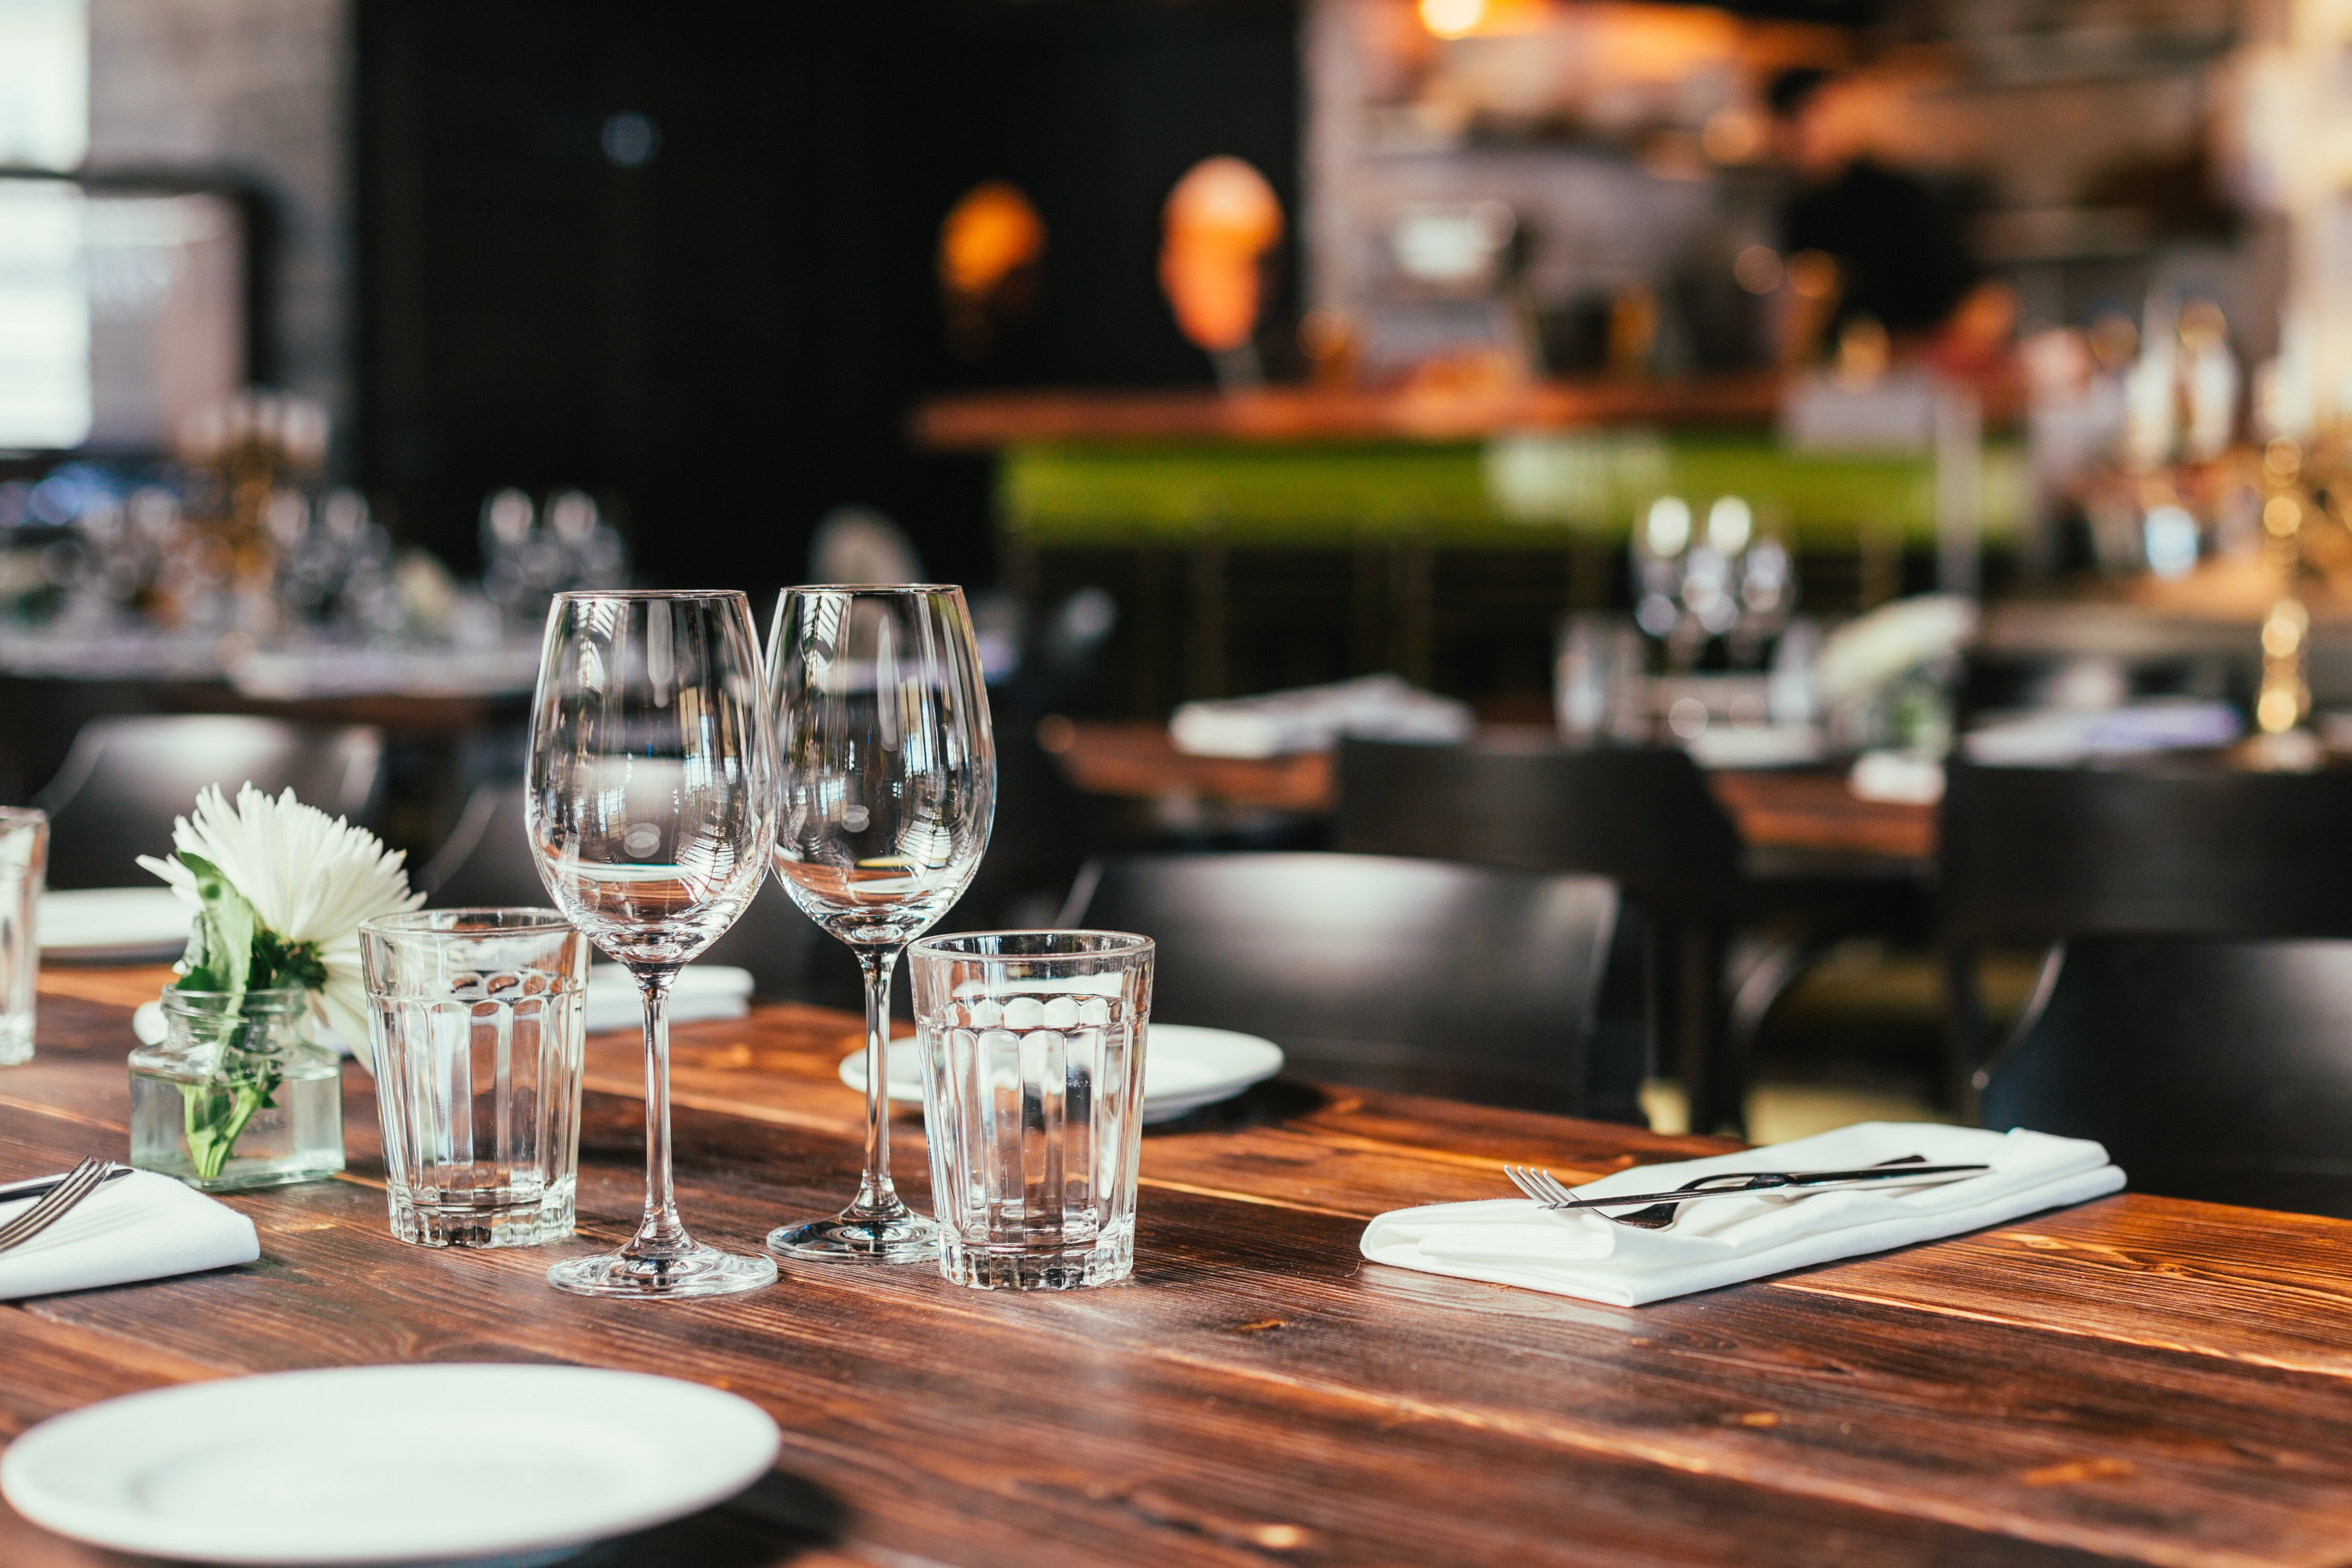 Distancing and hygiene measures will be key for frequent pub and restaurant diners